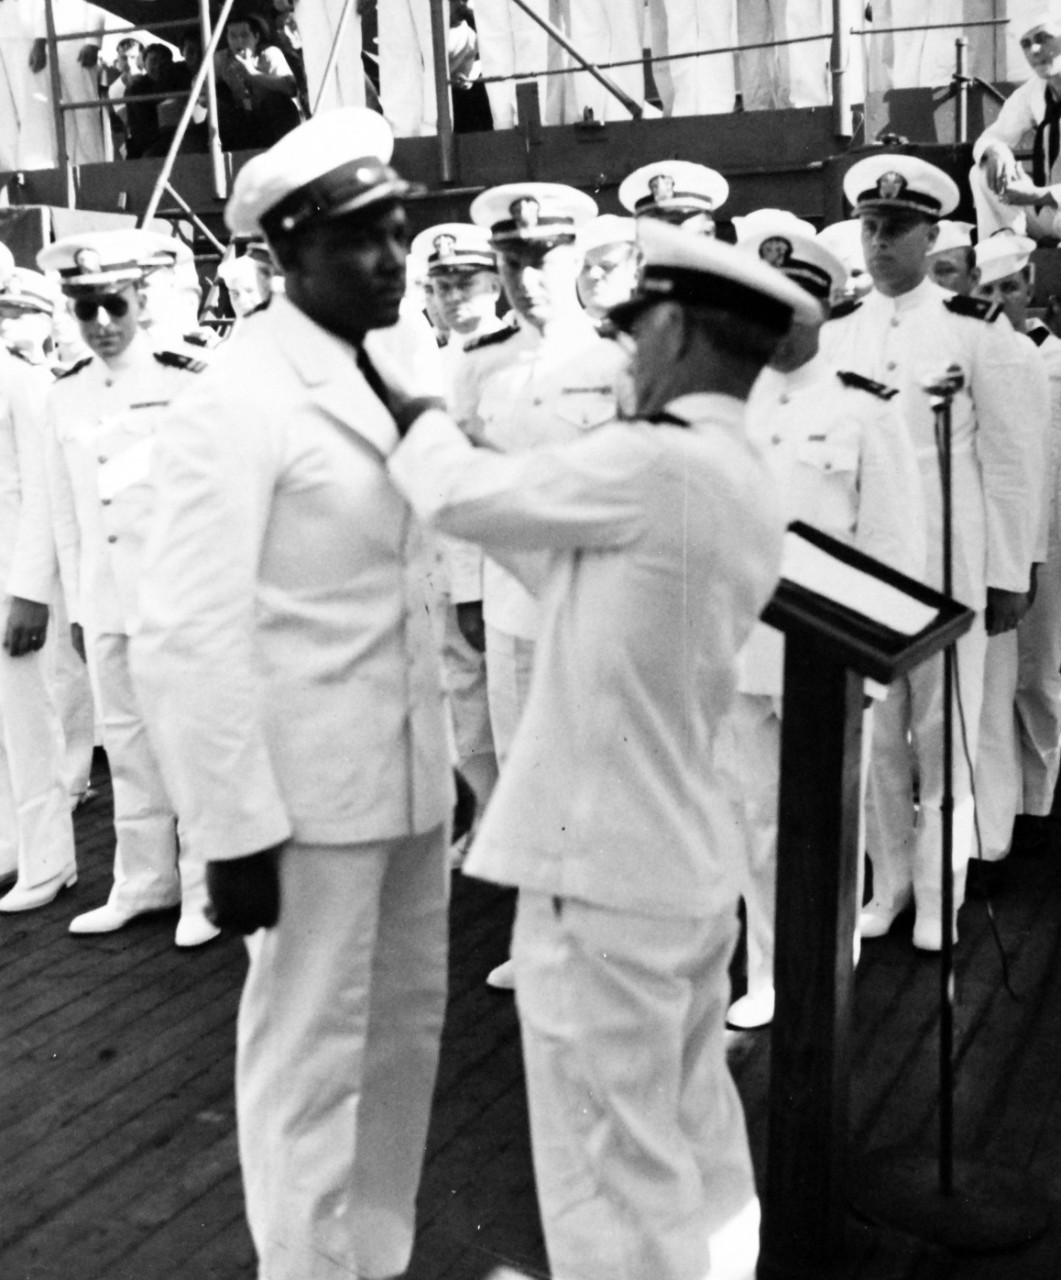 80-G-202071:   Steward 1/C Ben Edward Holt, USN, October 21, 1943.   Rear Admiral Ernest G. Small, USN, former Commanding Officer, presenting Purple Heart medals to enlisted men wounded in the Pacific on board USS Salt Lake City (CA-25).    Shown:  Steward 1/C Ben Edward Holt, USN, receives the award in recognition of wounds received onboard USS Nevada (BB-36) at Pearl Harbor, December 7, 1941.  Official U.S. Navy Photograph, now in the collections of the National Archives. 